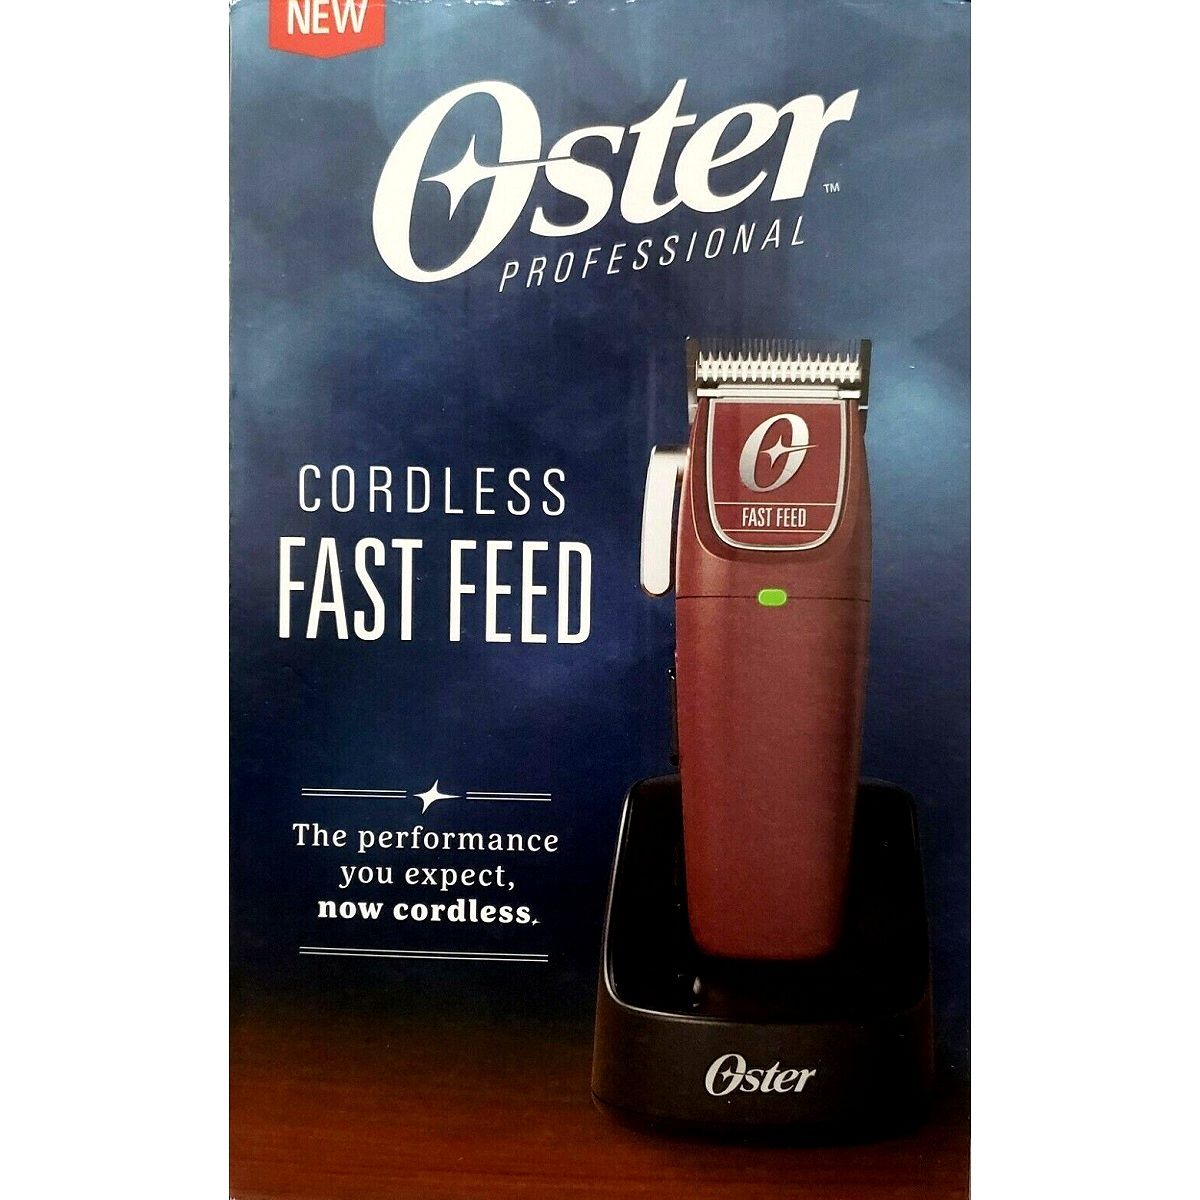 Fast Cordless Feed (#076023-910-000) Barbersmania – Oster Clipper